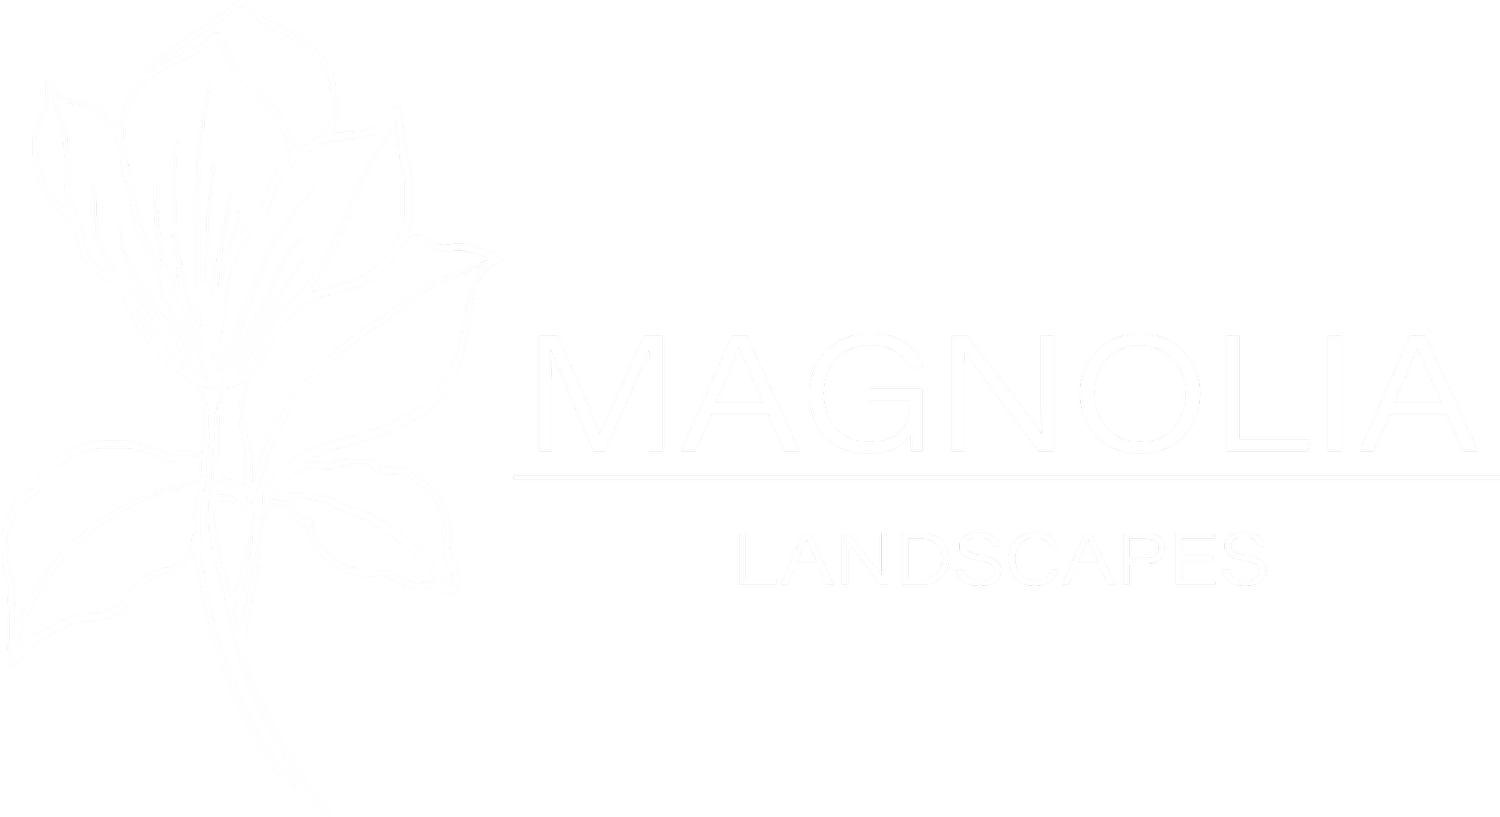 Magnolia Landscapes and Horticultural Services